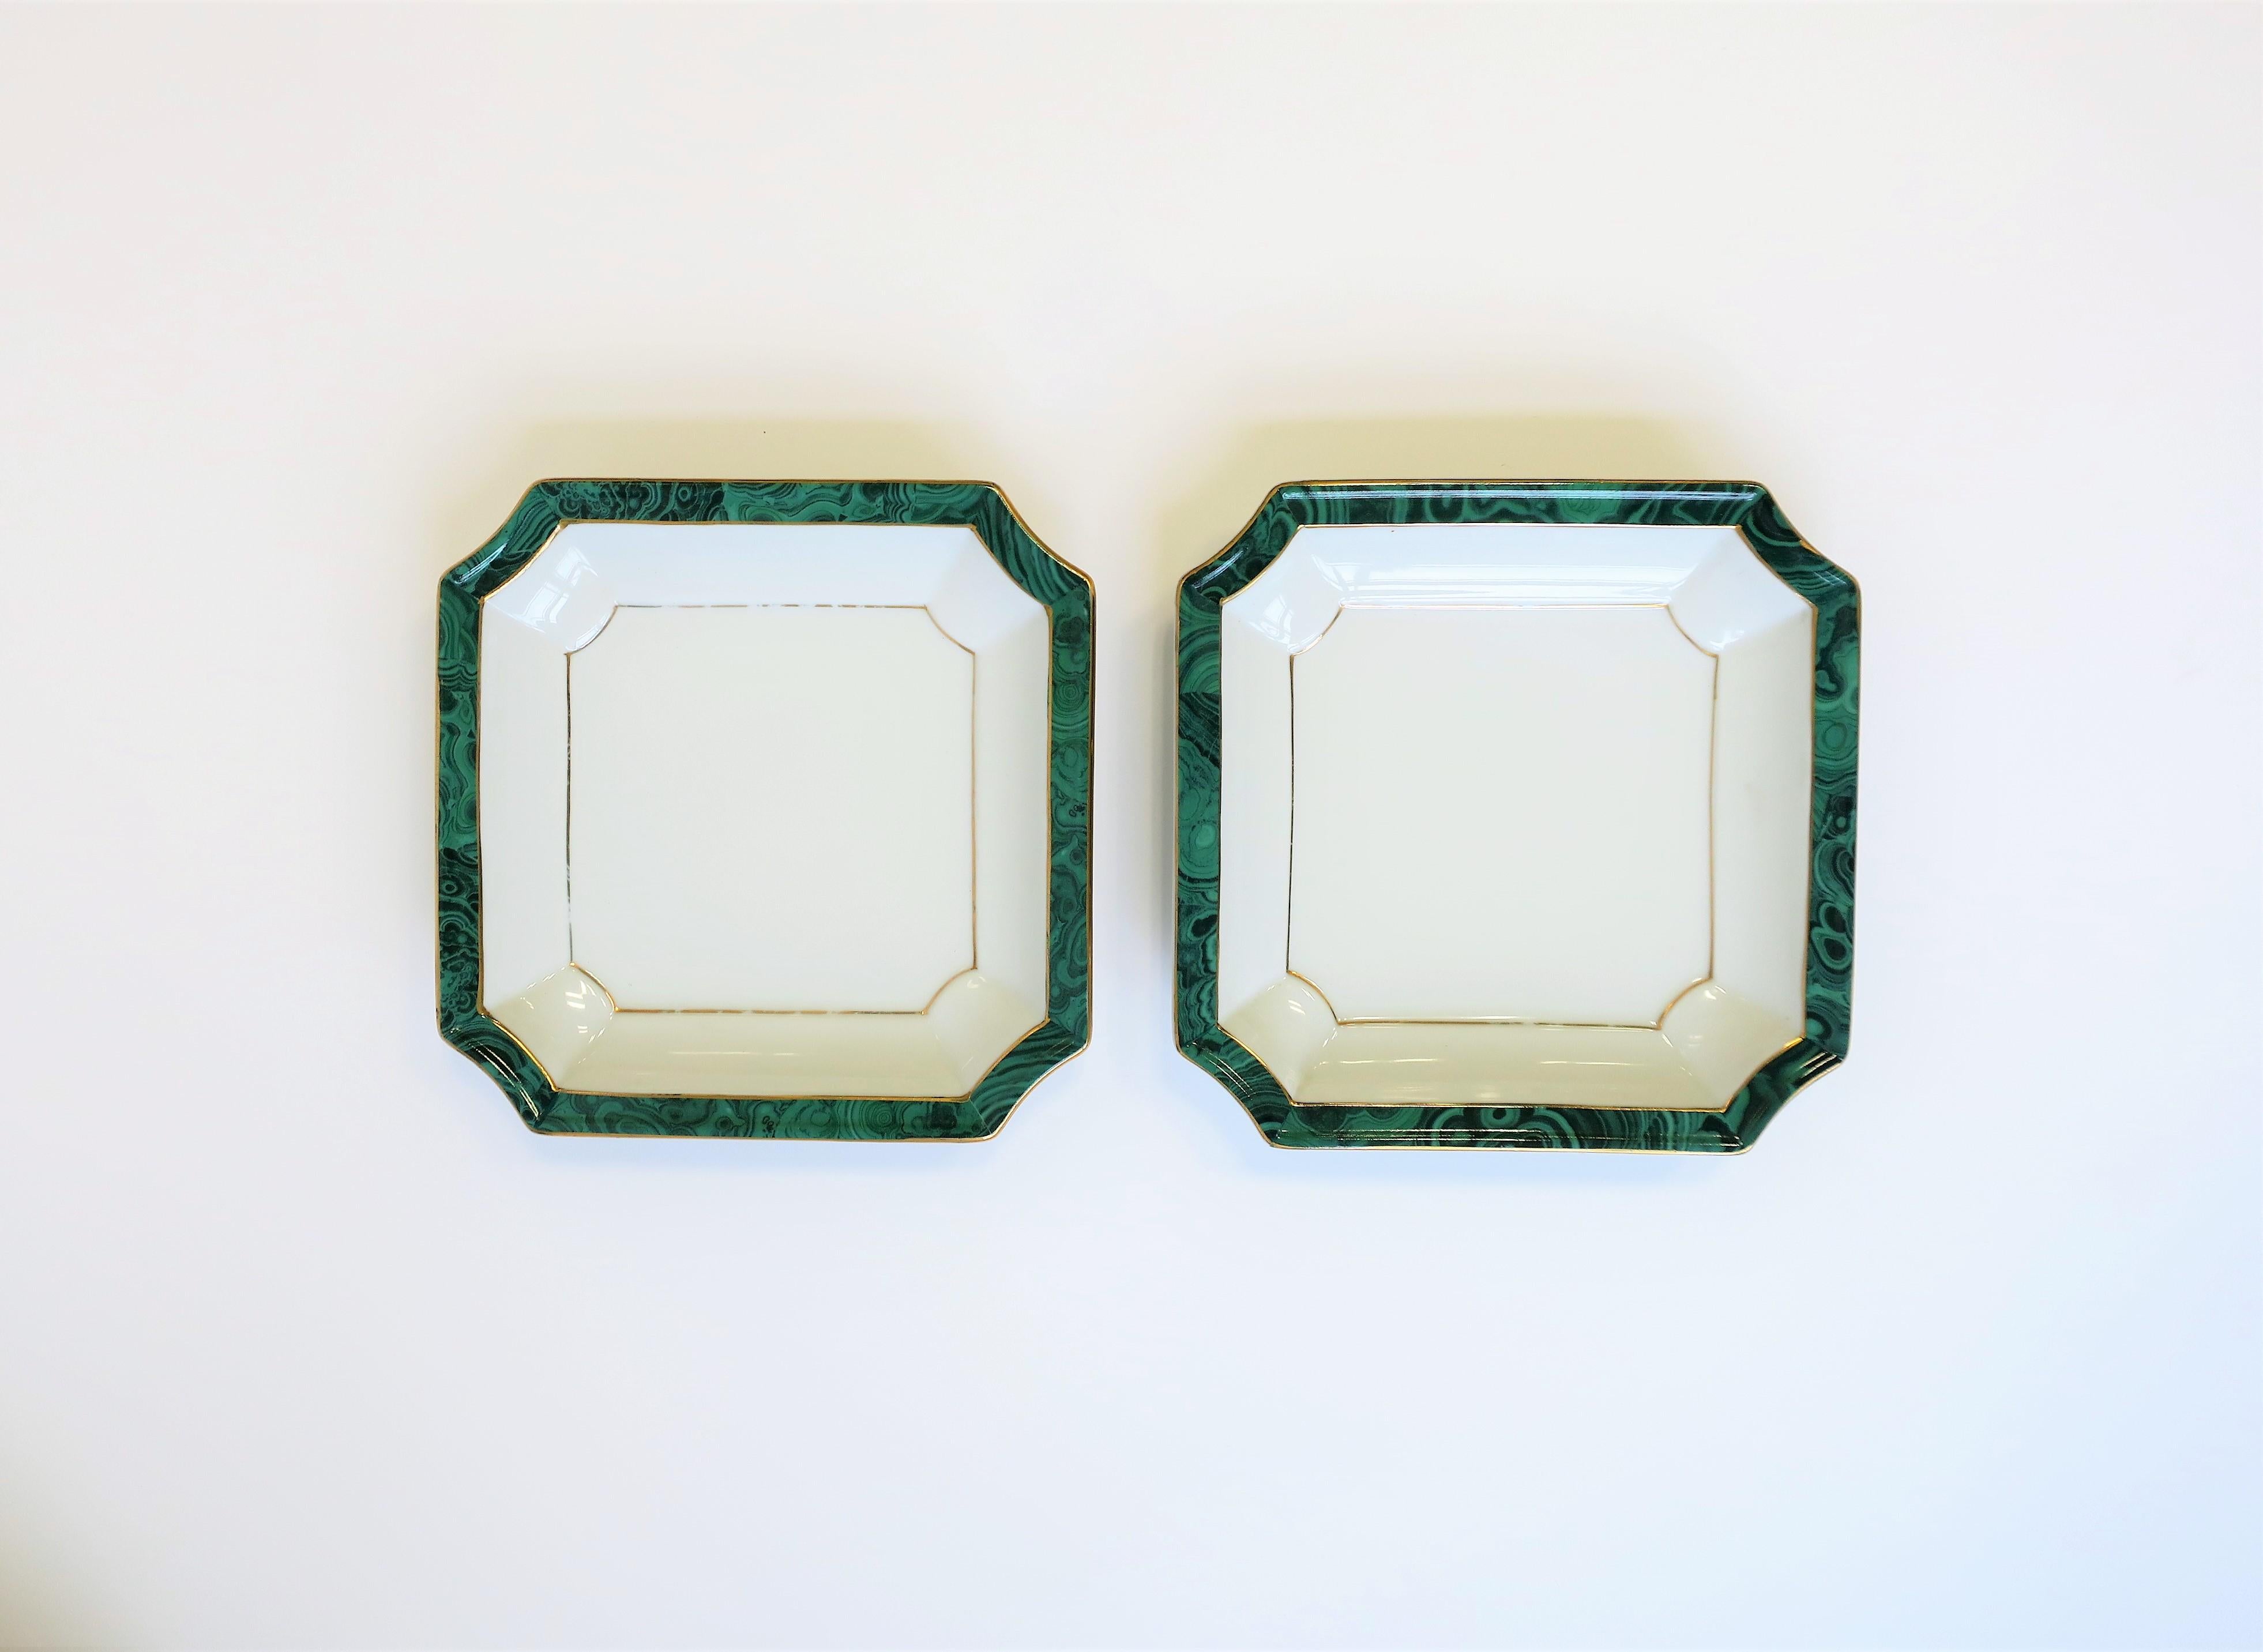 A pair of white ceramic bowls with a green malachite design style and gold accent decorative edge, circa 1980s. A great set for entertaining; Dips, vegetables, etc. Dimensions: 8